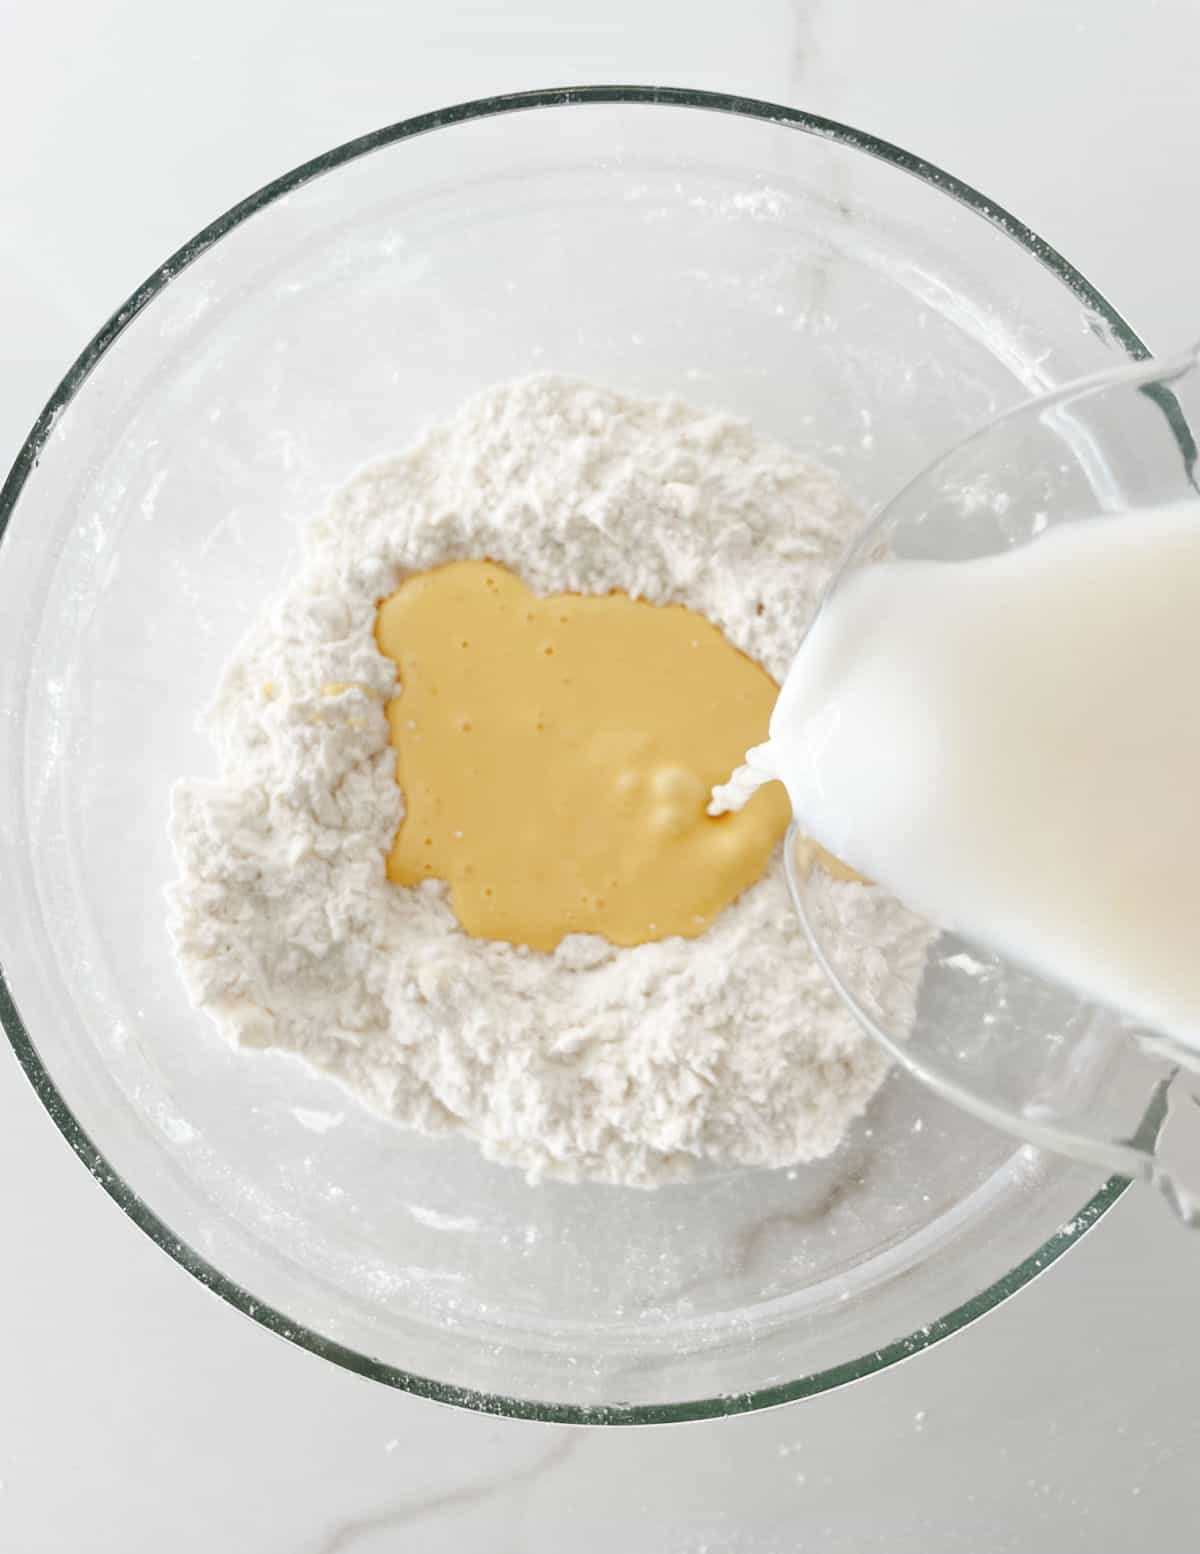 Adding milk and egg to scone dough in a glass bowl on a white surface.